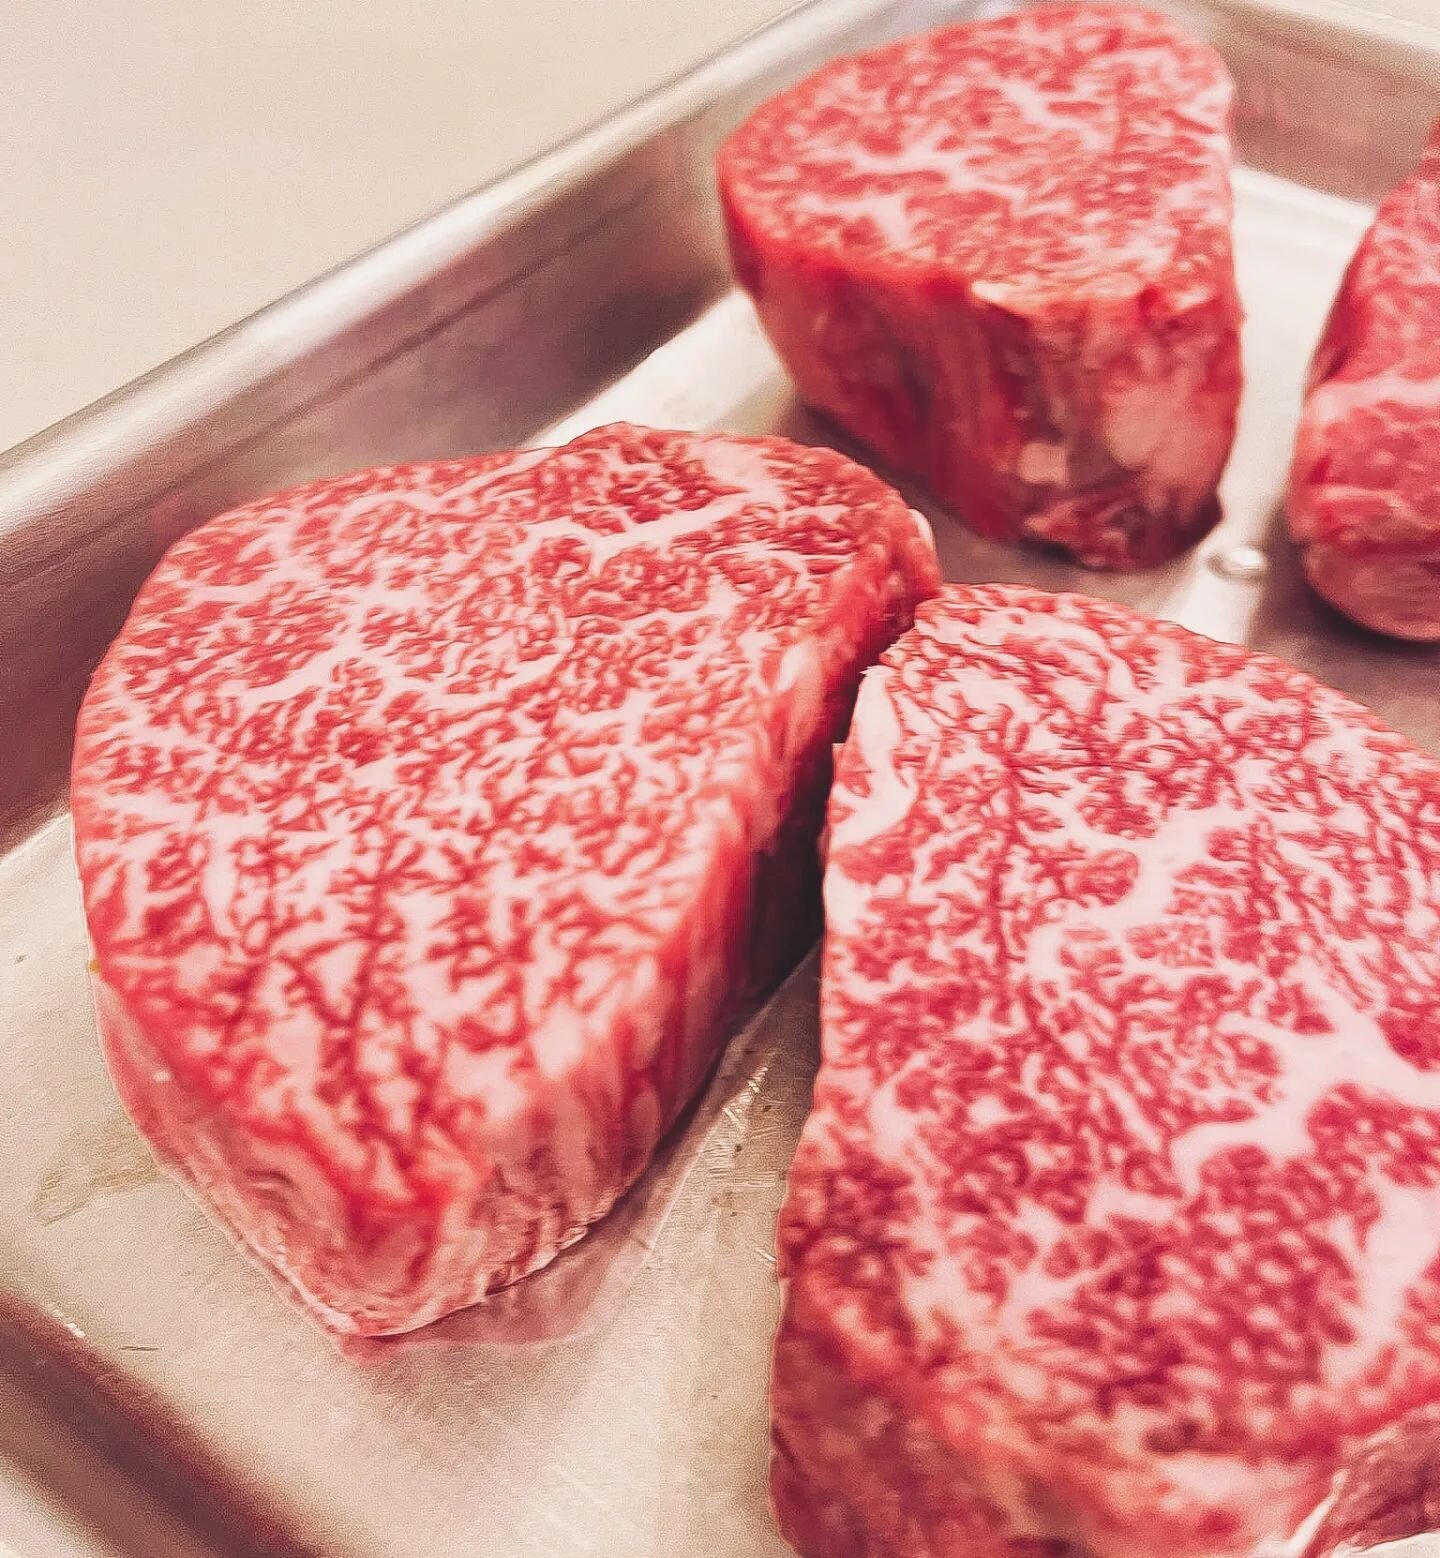 Chef Nathan always gets his hands on the best ingredients. This A5 Wagyu could be for your dinner! Just give us a call at 850-693-9751